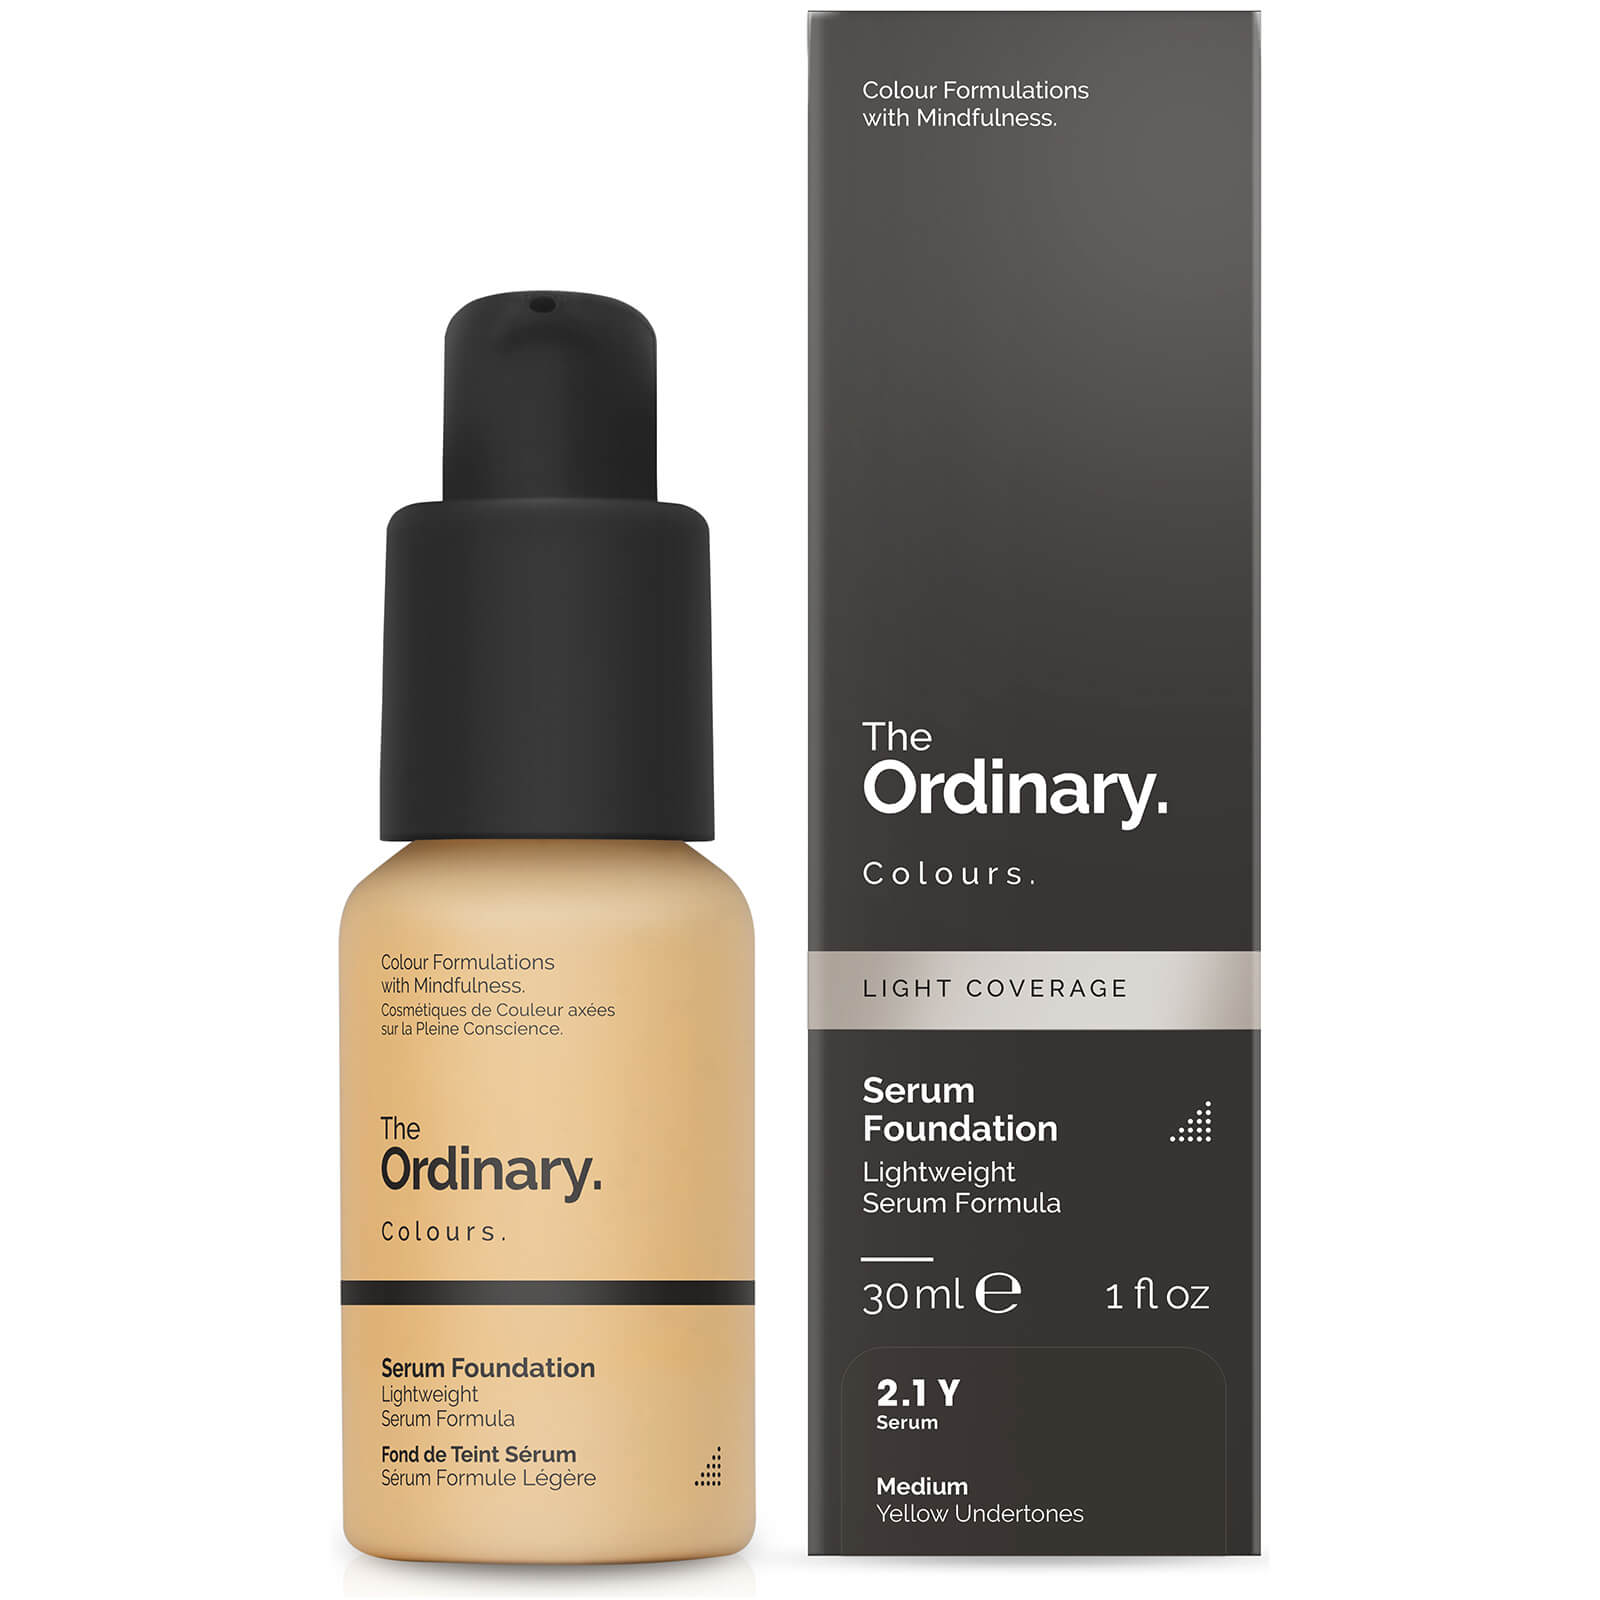 The Ordinary Serum Foundation with SPF 15 by The Ordinary Colours 30ml (Various Shades) - 2.1Y